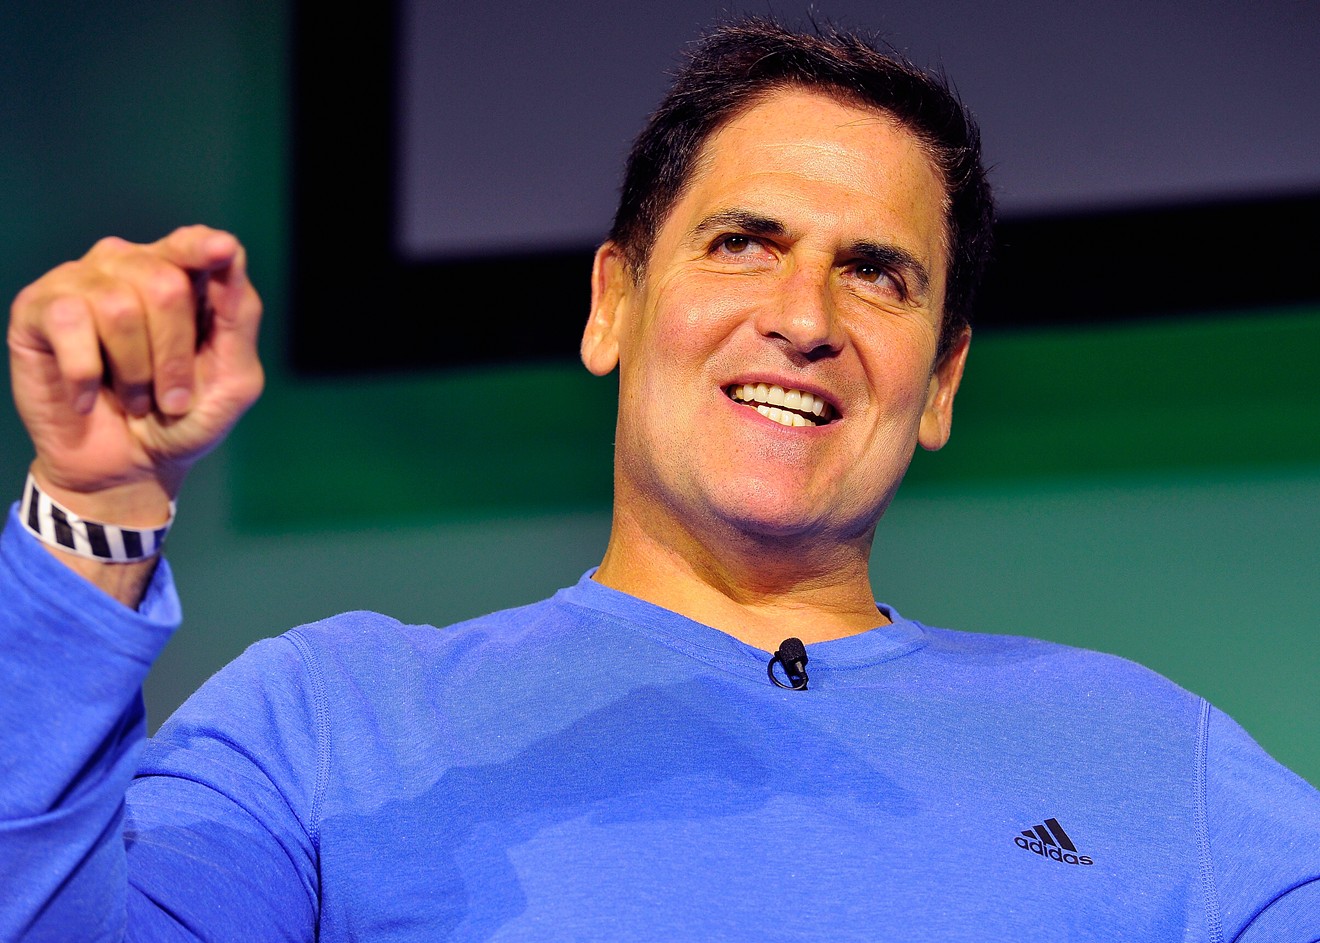 We're just saying we'd gladly put up with Mark Cuban's dad jokes.